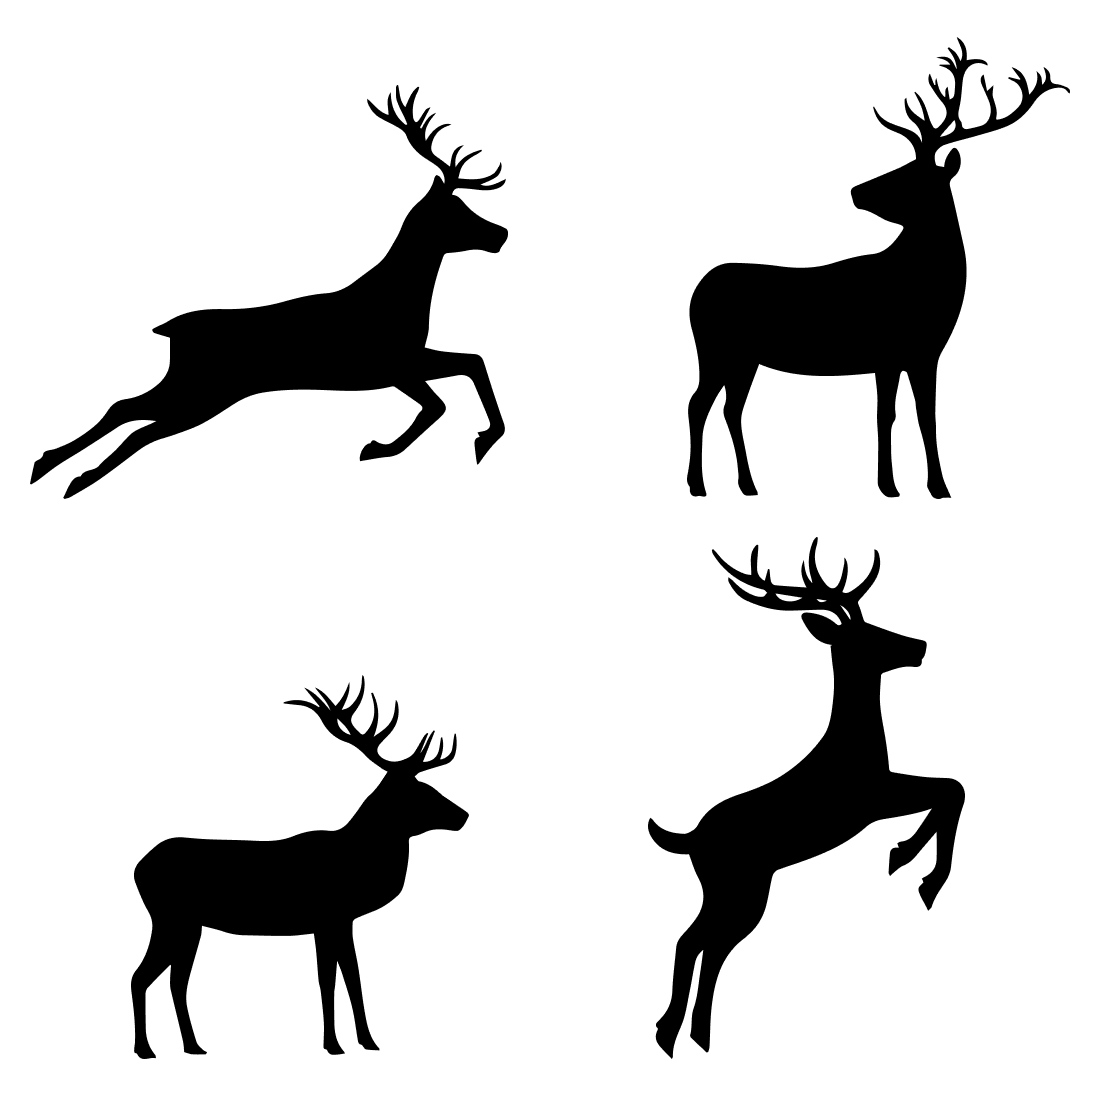 Four silhouettes of deers on a white background.